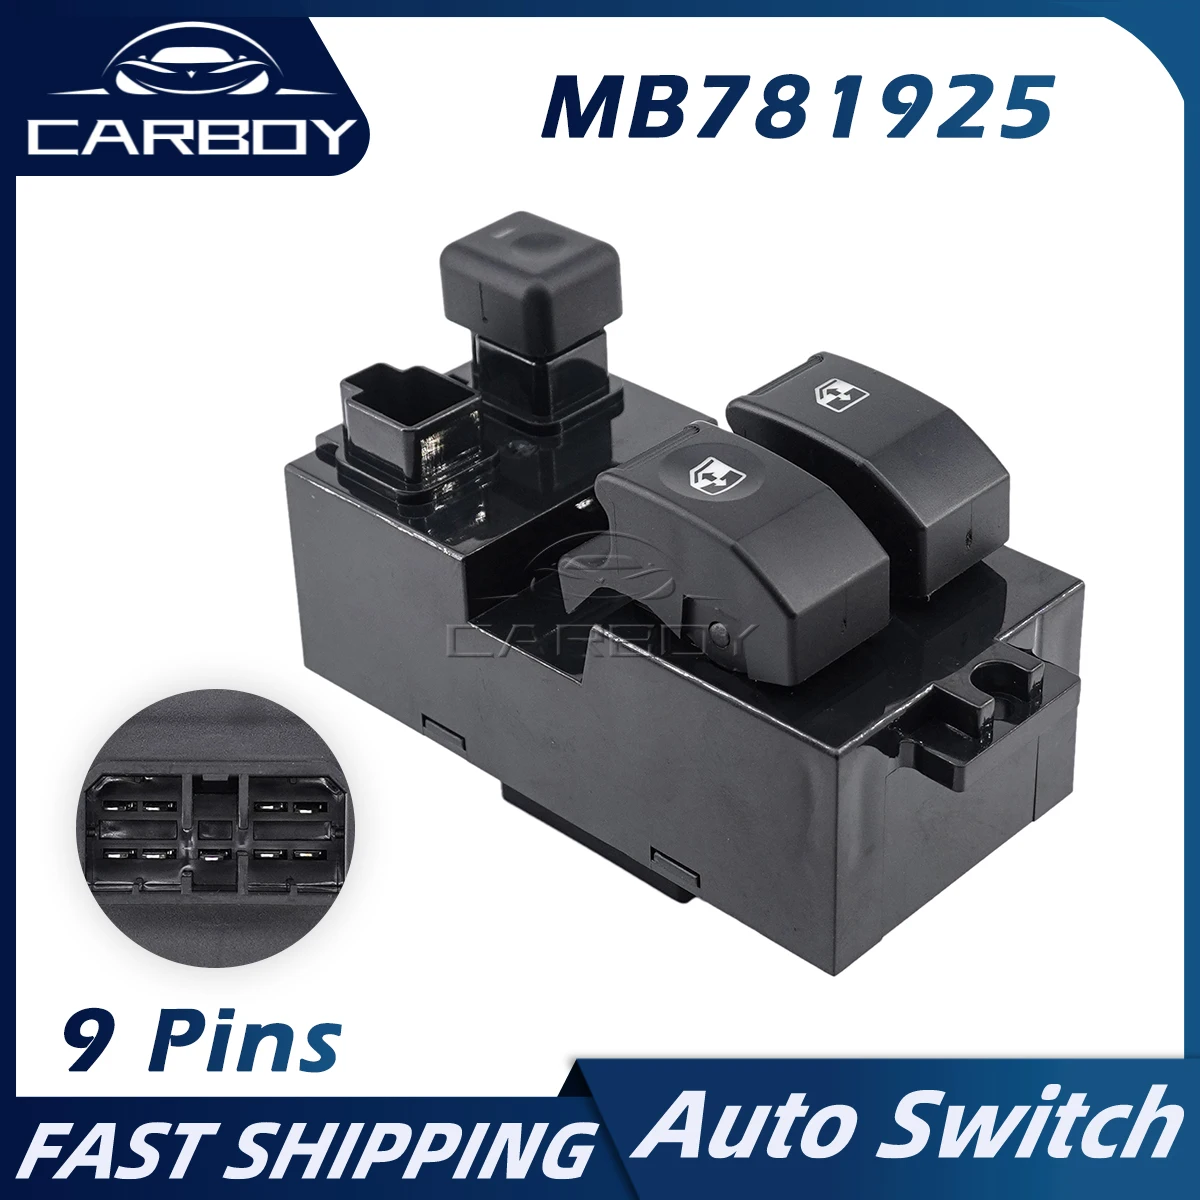 

MB781925 Master Power Window Switch Lifter Button For 1994 1995 1996 1997 1998 1999 Mitsubishi Pajero II Car Accessories 9 Pins